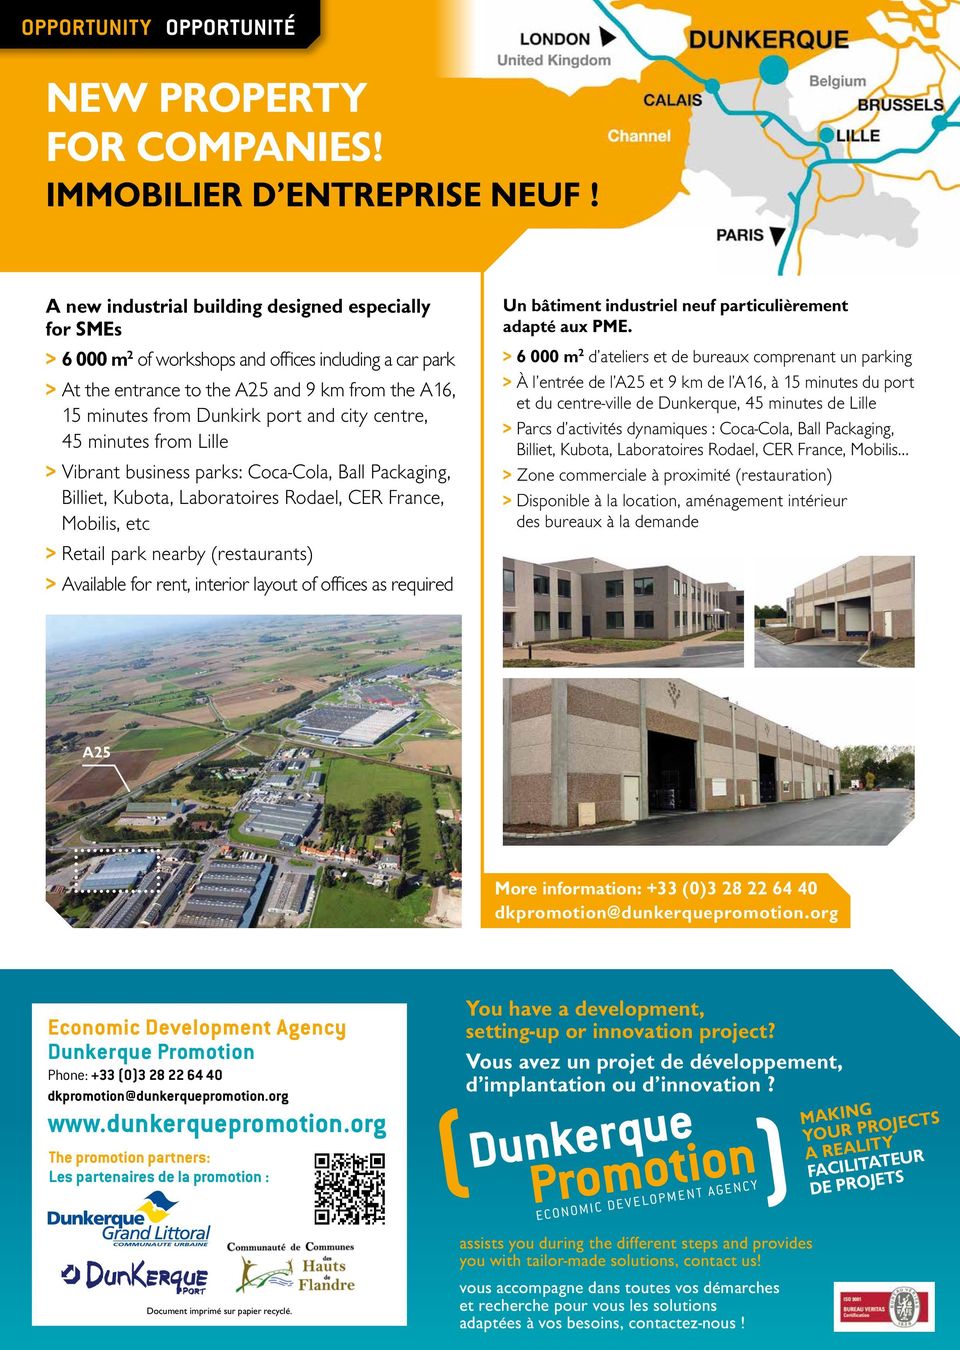 centre, 45 minutes from Lille Vibrant business parks: Coca-Cola, Ball Packaging, Billiet, Kubota, Laboratoires Rodael, CER France, Mobilis, etc Retail park nearby (restaurants) Available for rent,